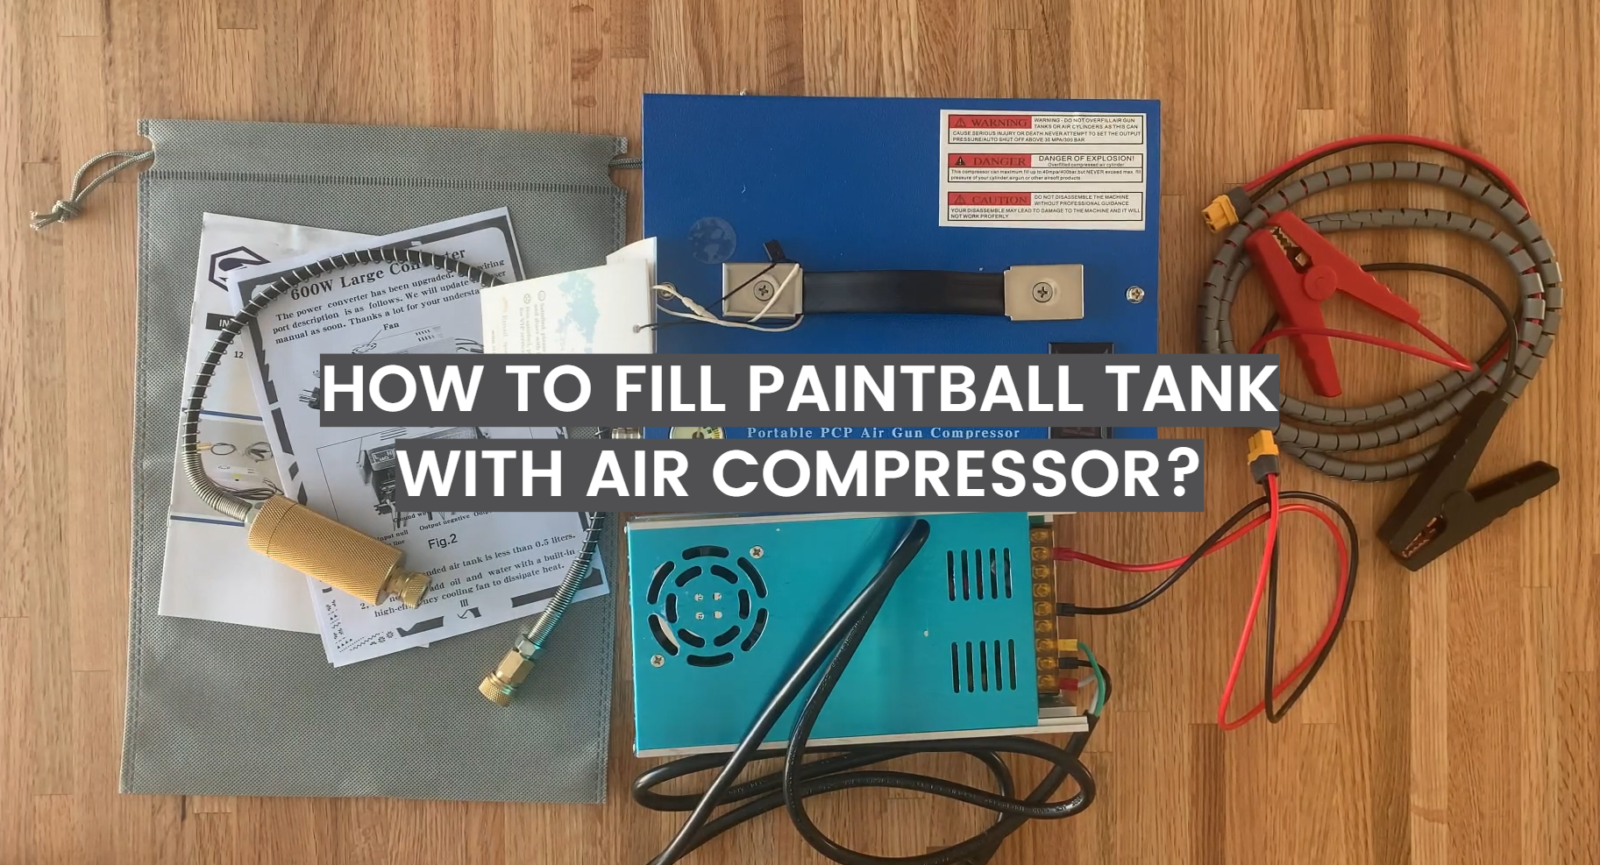 How to Fill Paintball Tank With Air Compressor?